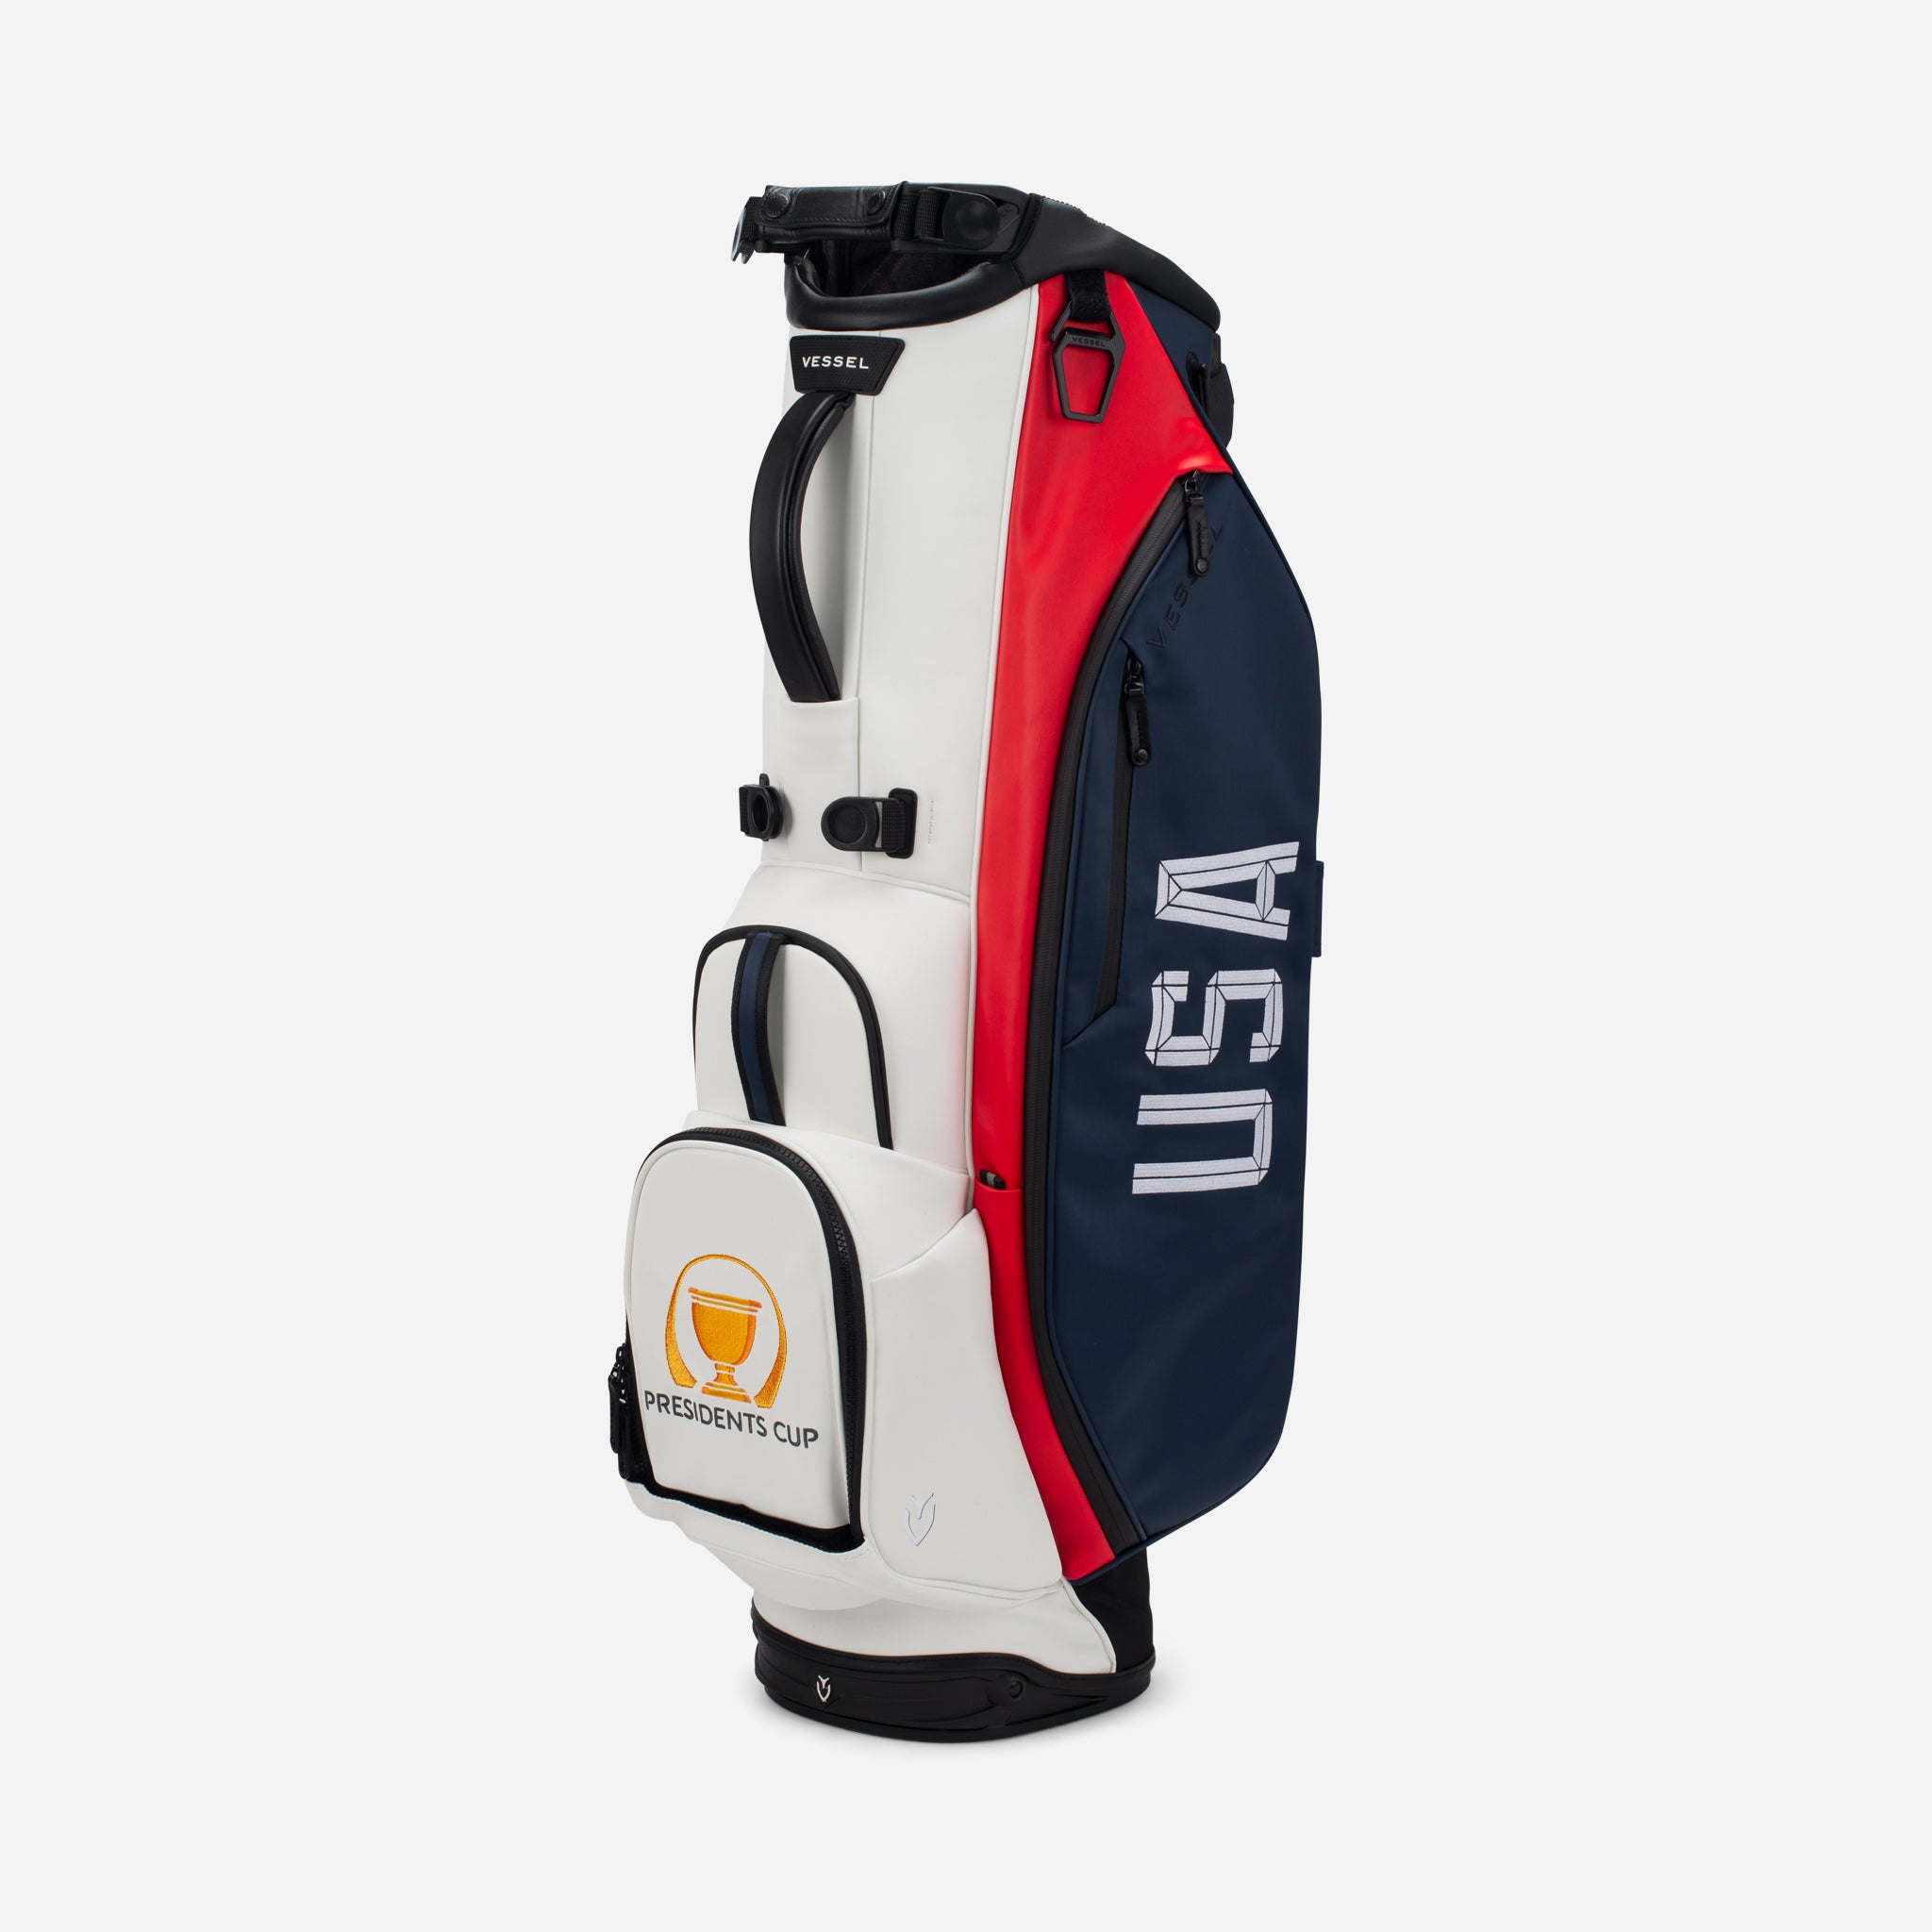 2022 Presidents Cup USA Golf Stand Bag Limited Edition Golf Bags